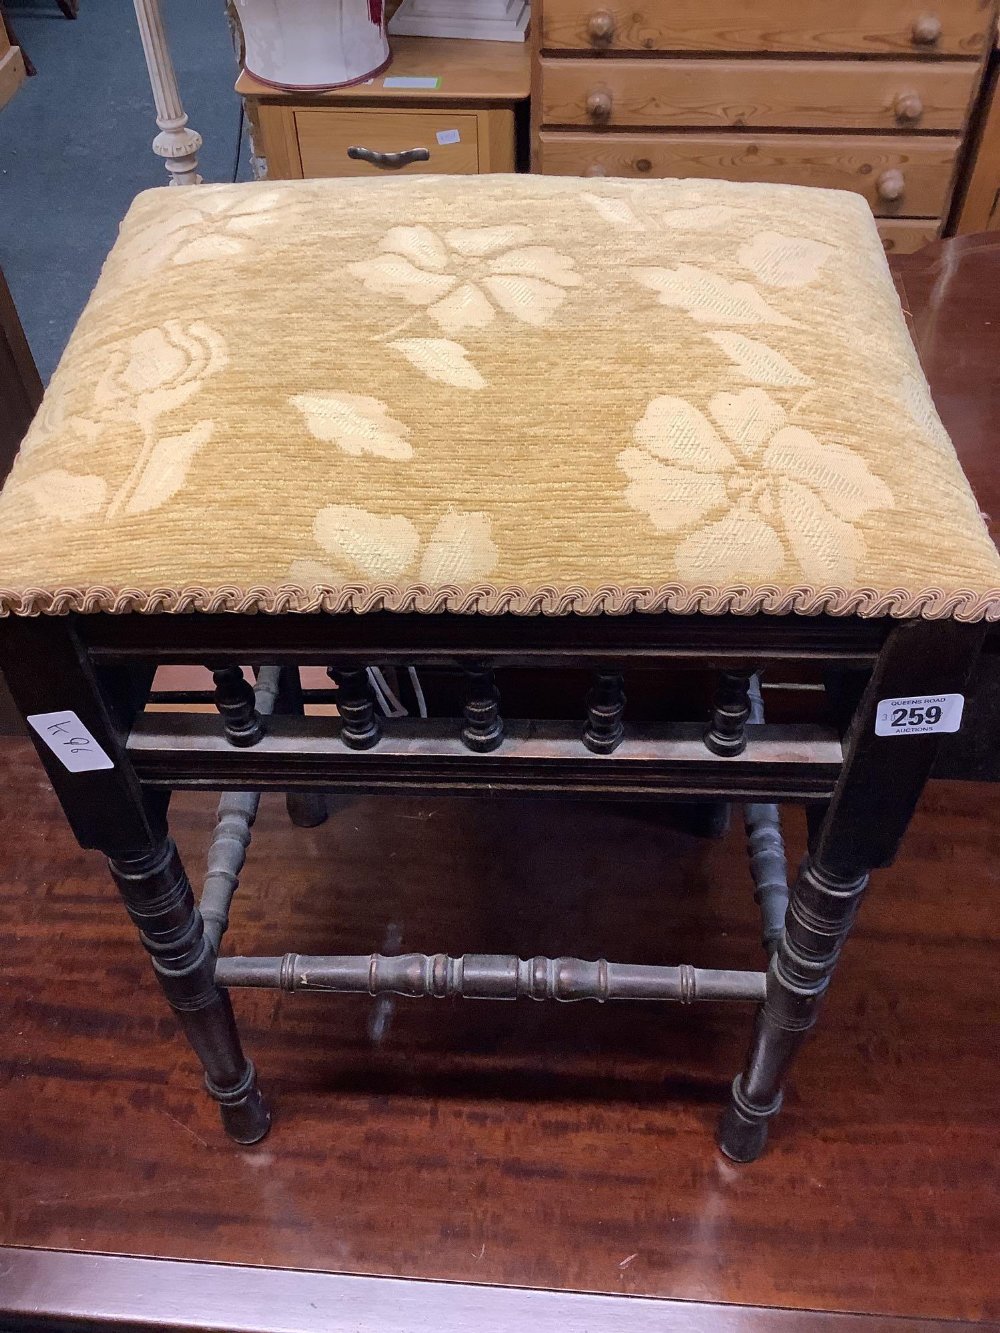 EDWARDIAN UPHOLSTERED BEDROOM STOOL WITH TURNED LEGS - Image 2 of 2